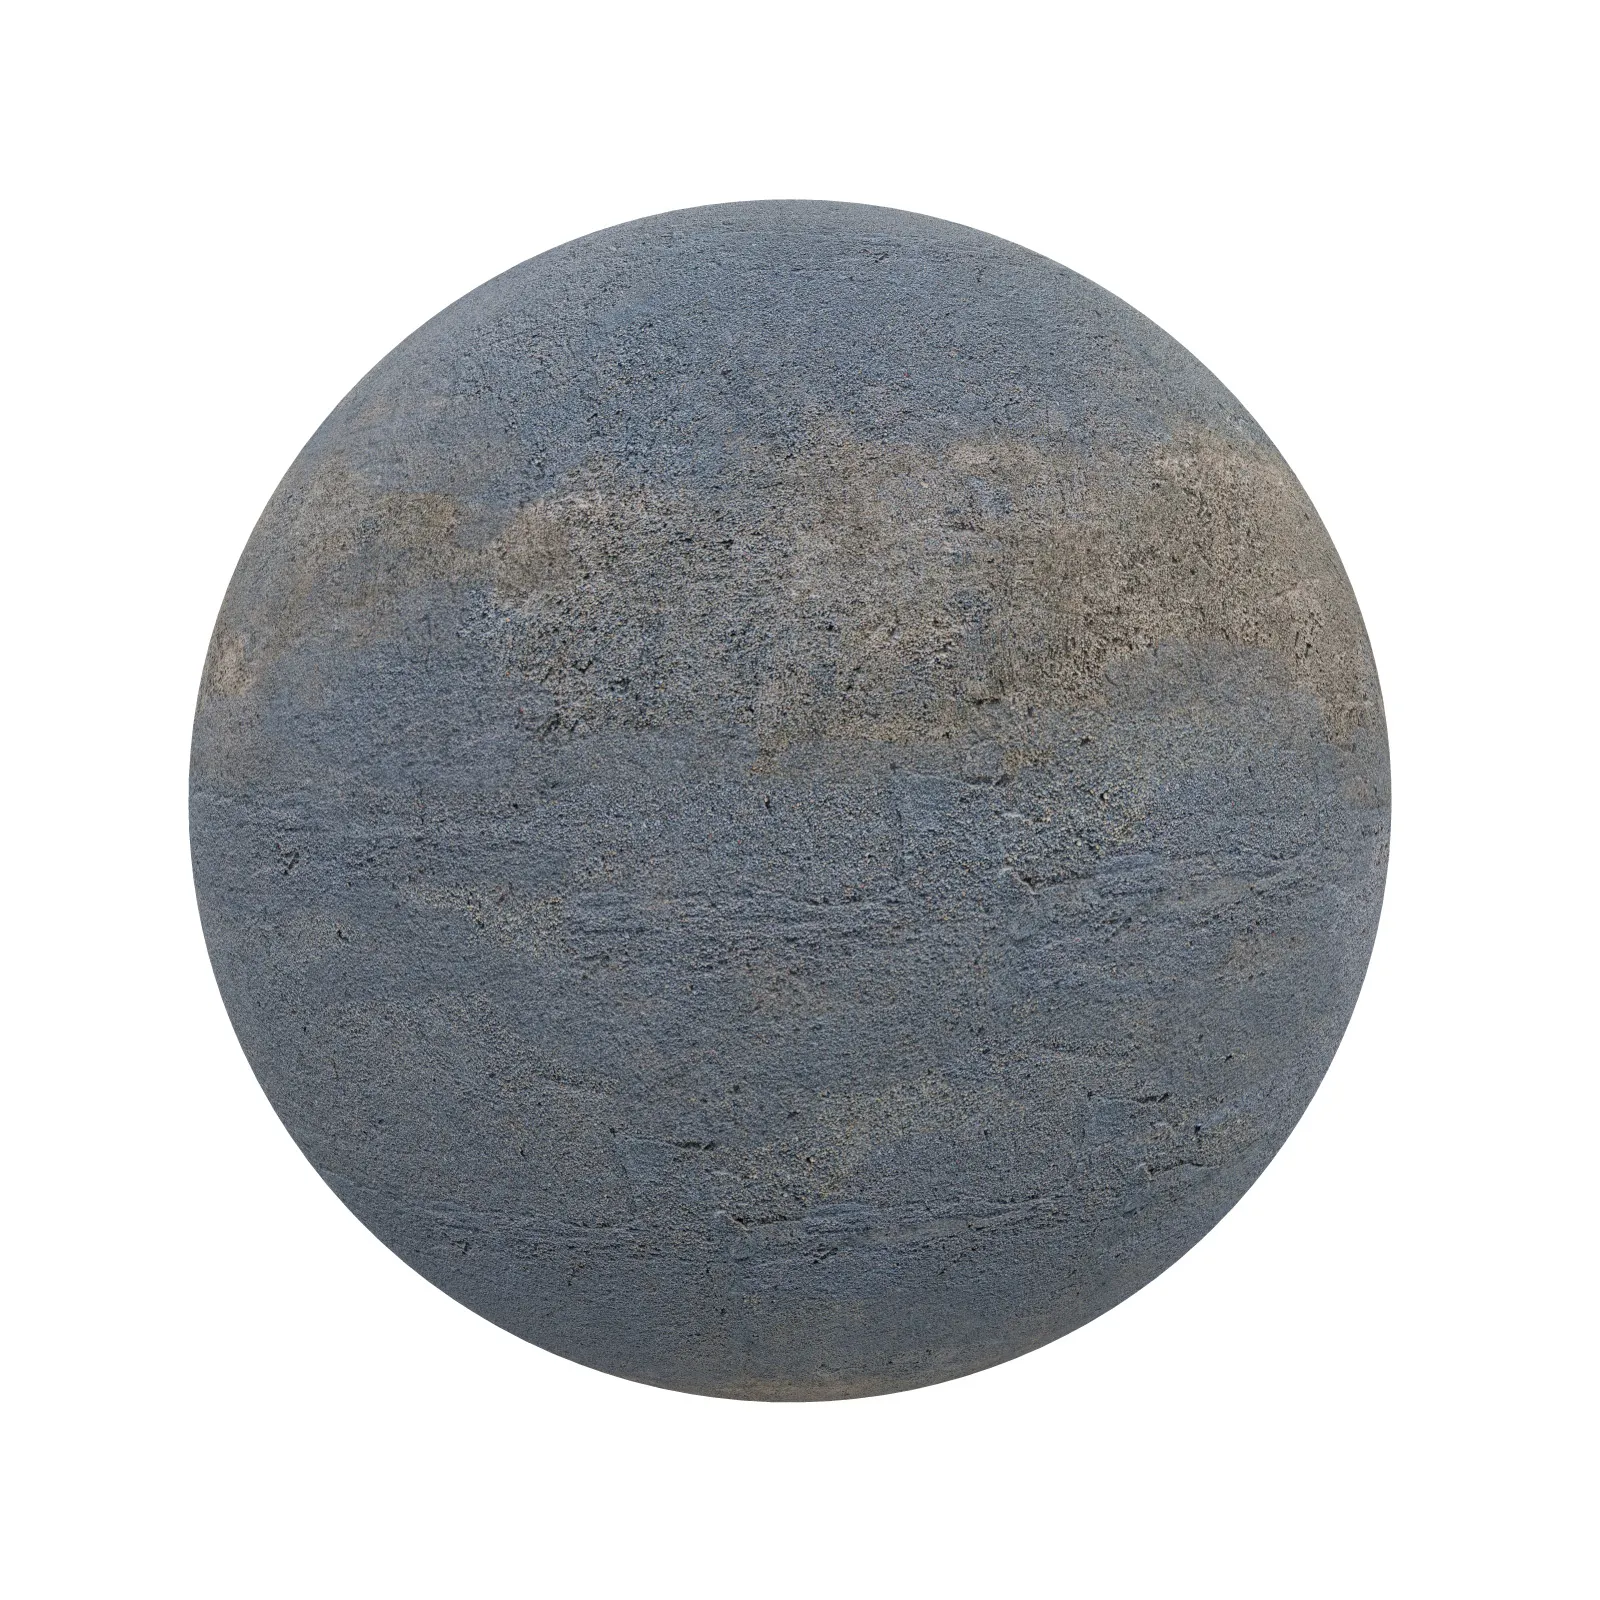 TEXTURES – STONES – CGAxis PBR Colection Vol 1 Stones – blue rough stone